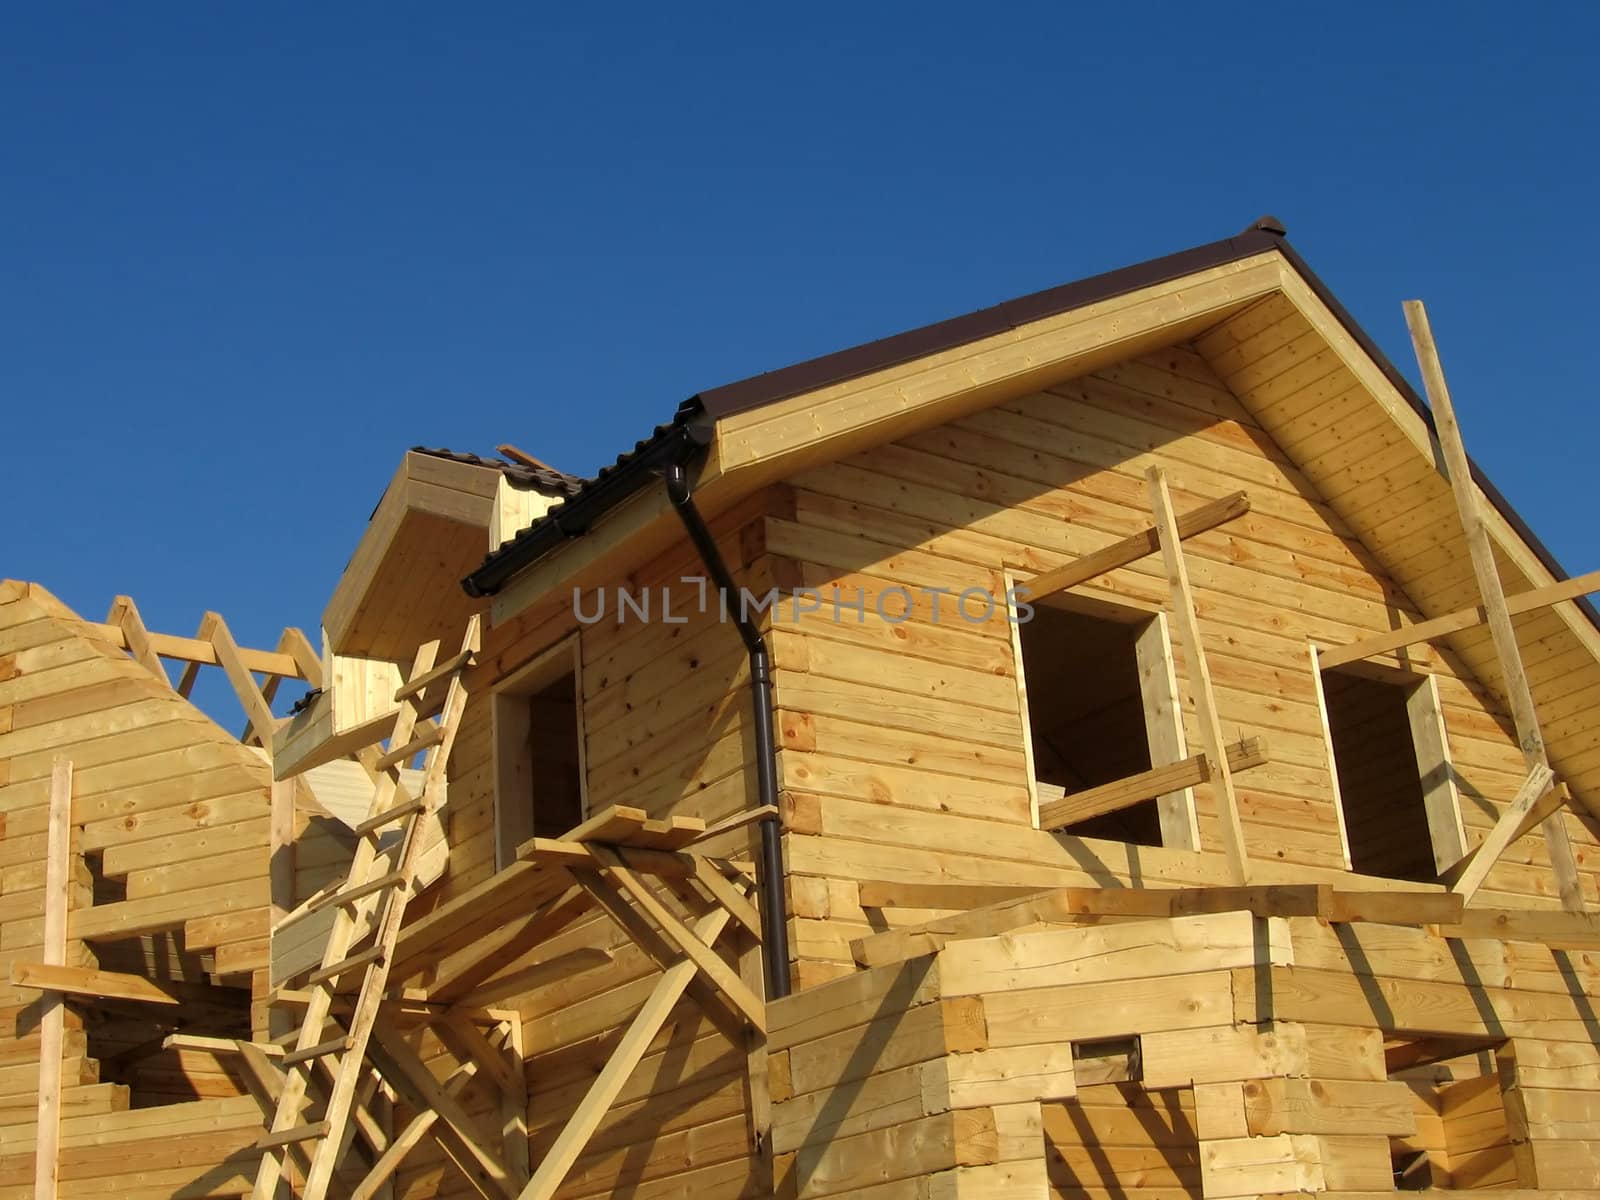 The new house creating from wood bars on a background of blue sky